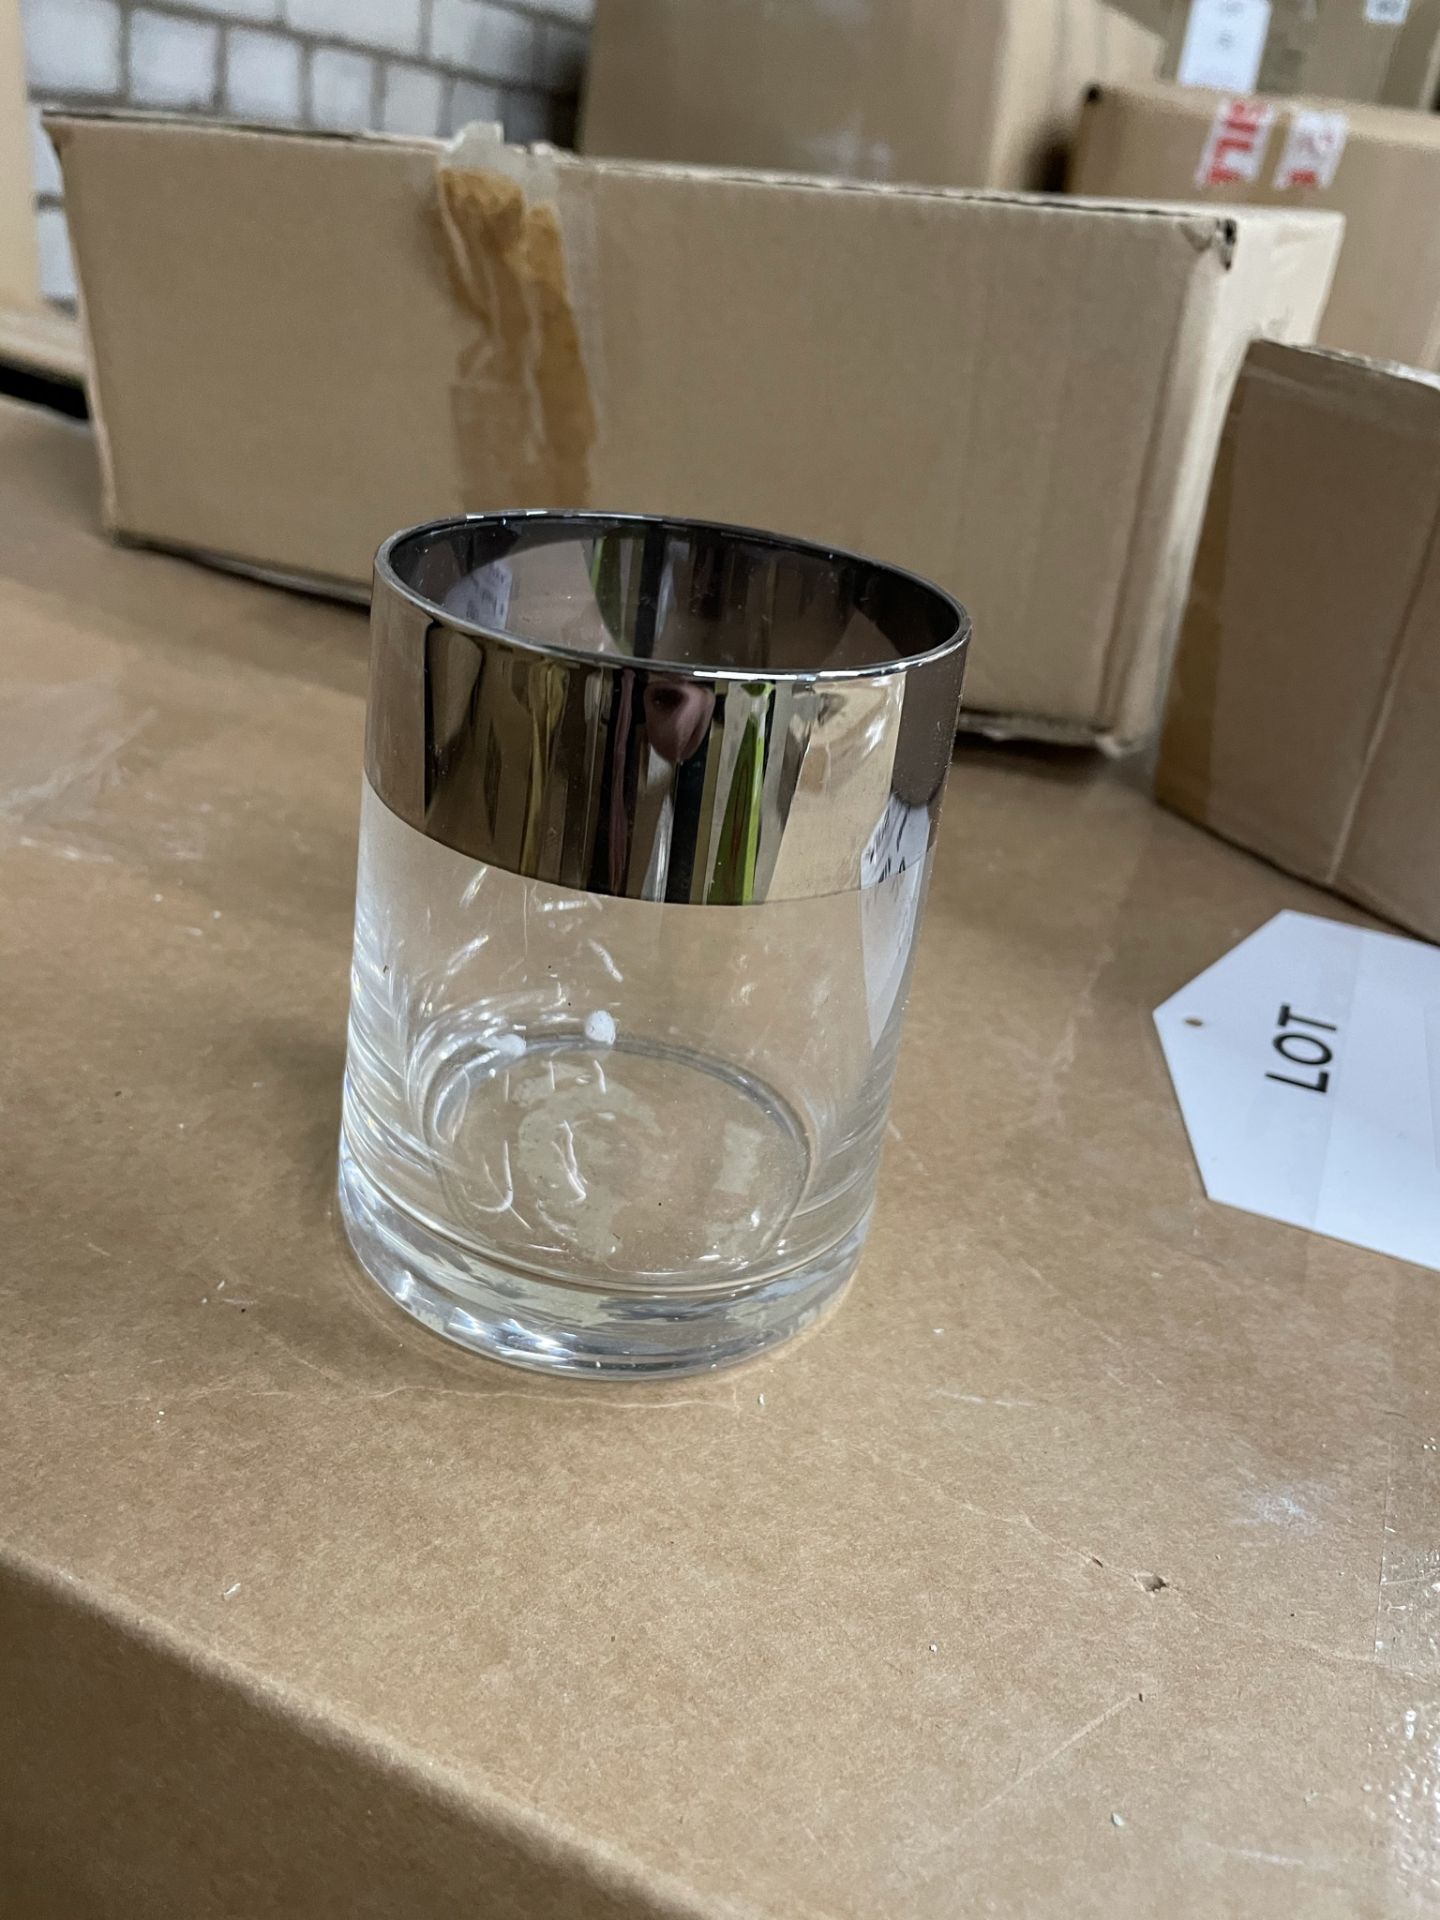 Large Quantity of Various Spare/Loose Glassware Items - Examples can be seen in pictures - Image 15 of 18